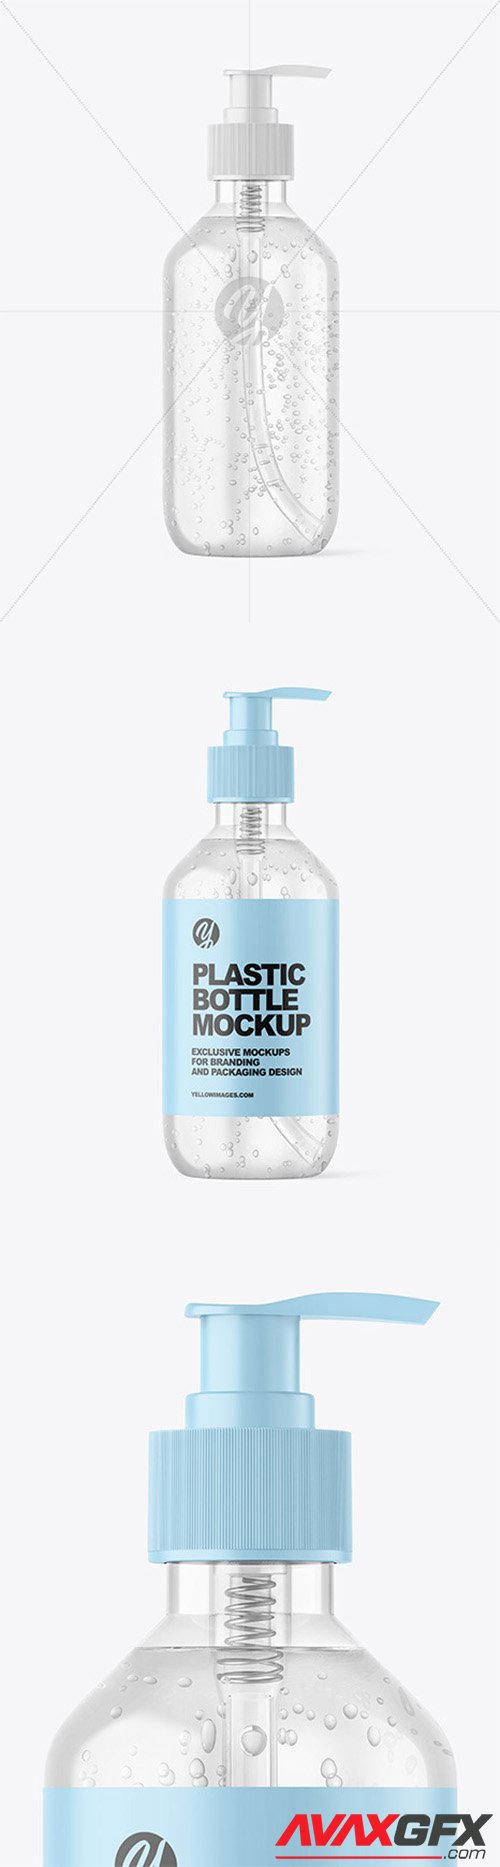 Clear Cosmetic Bottle with Pump Mockup 79931